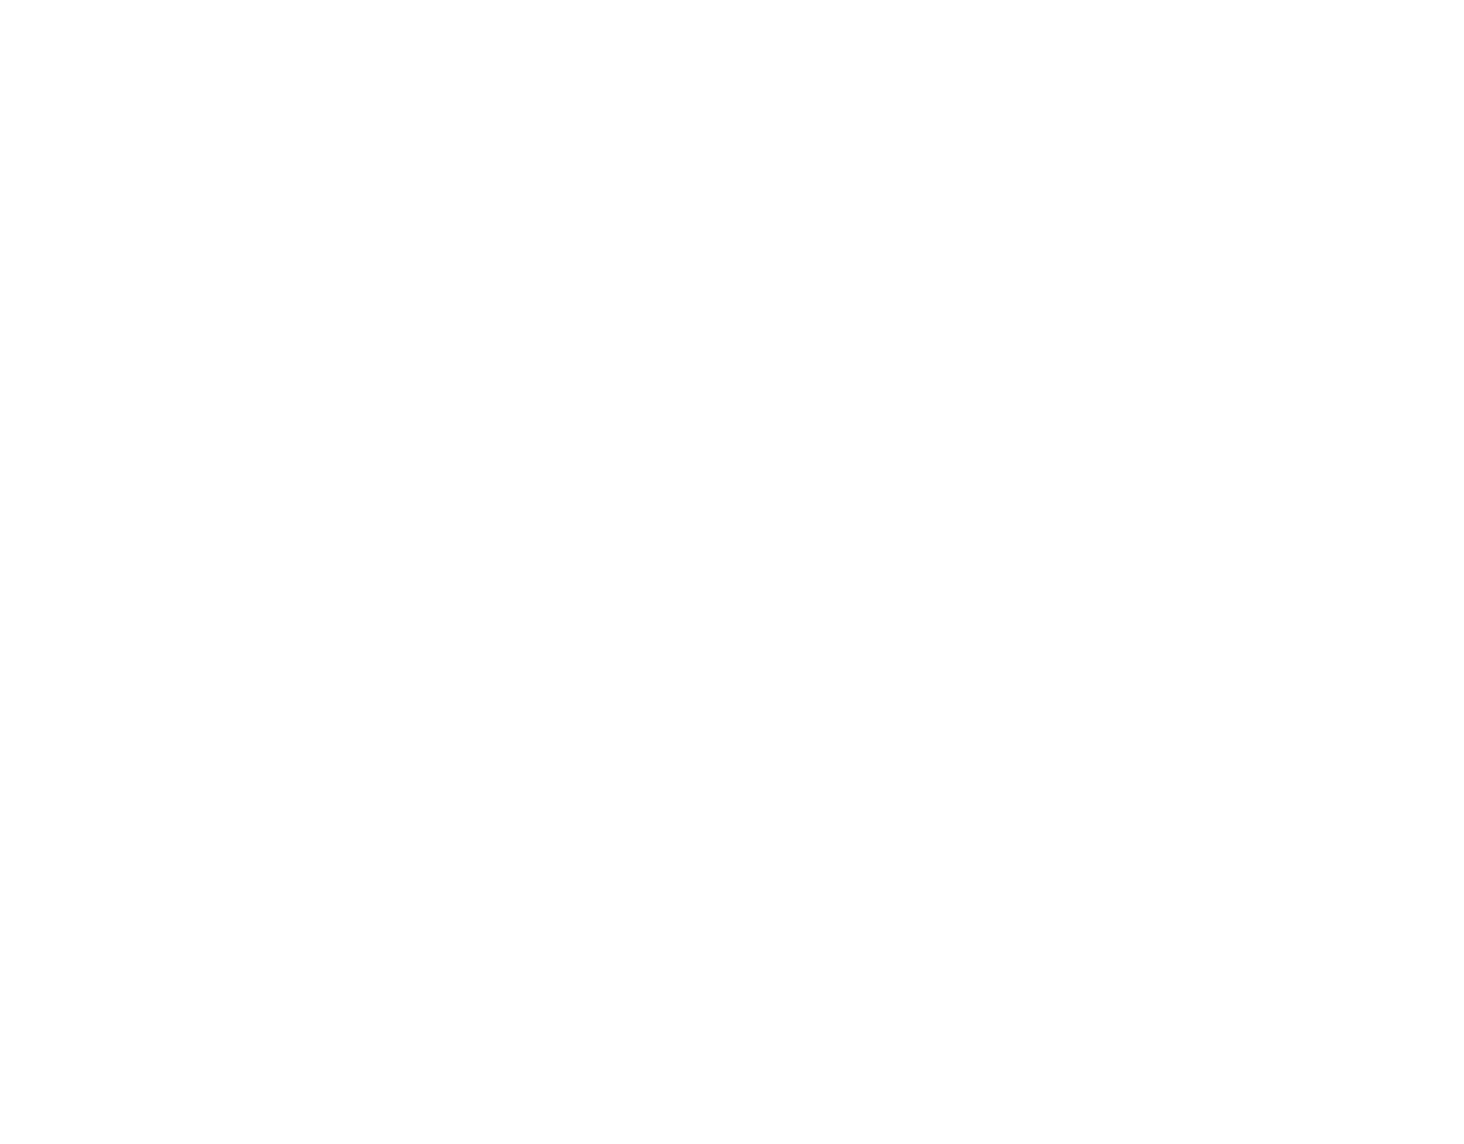 OVER THE RAINBOW HANDSOME AMUSE PRESENTS